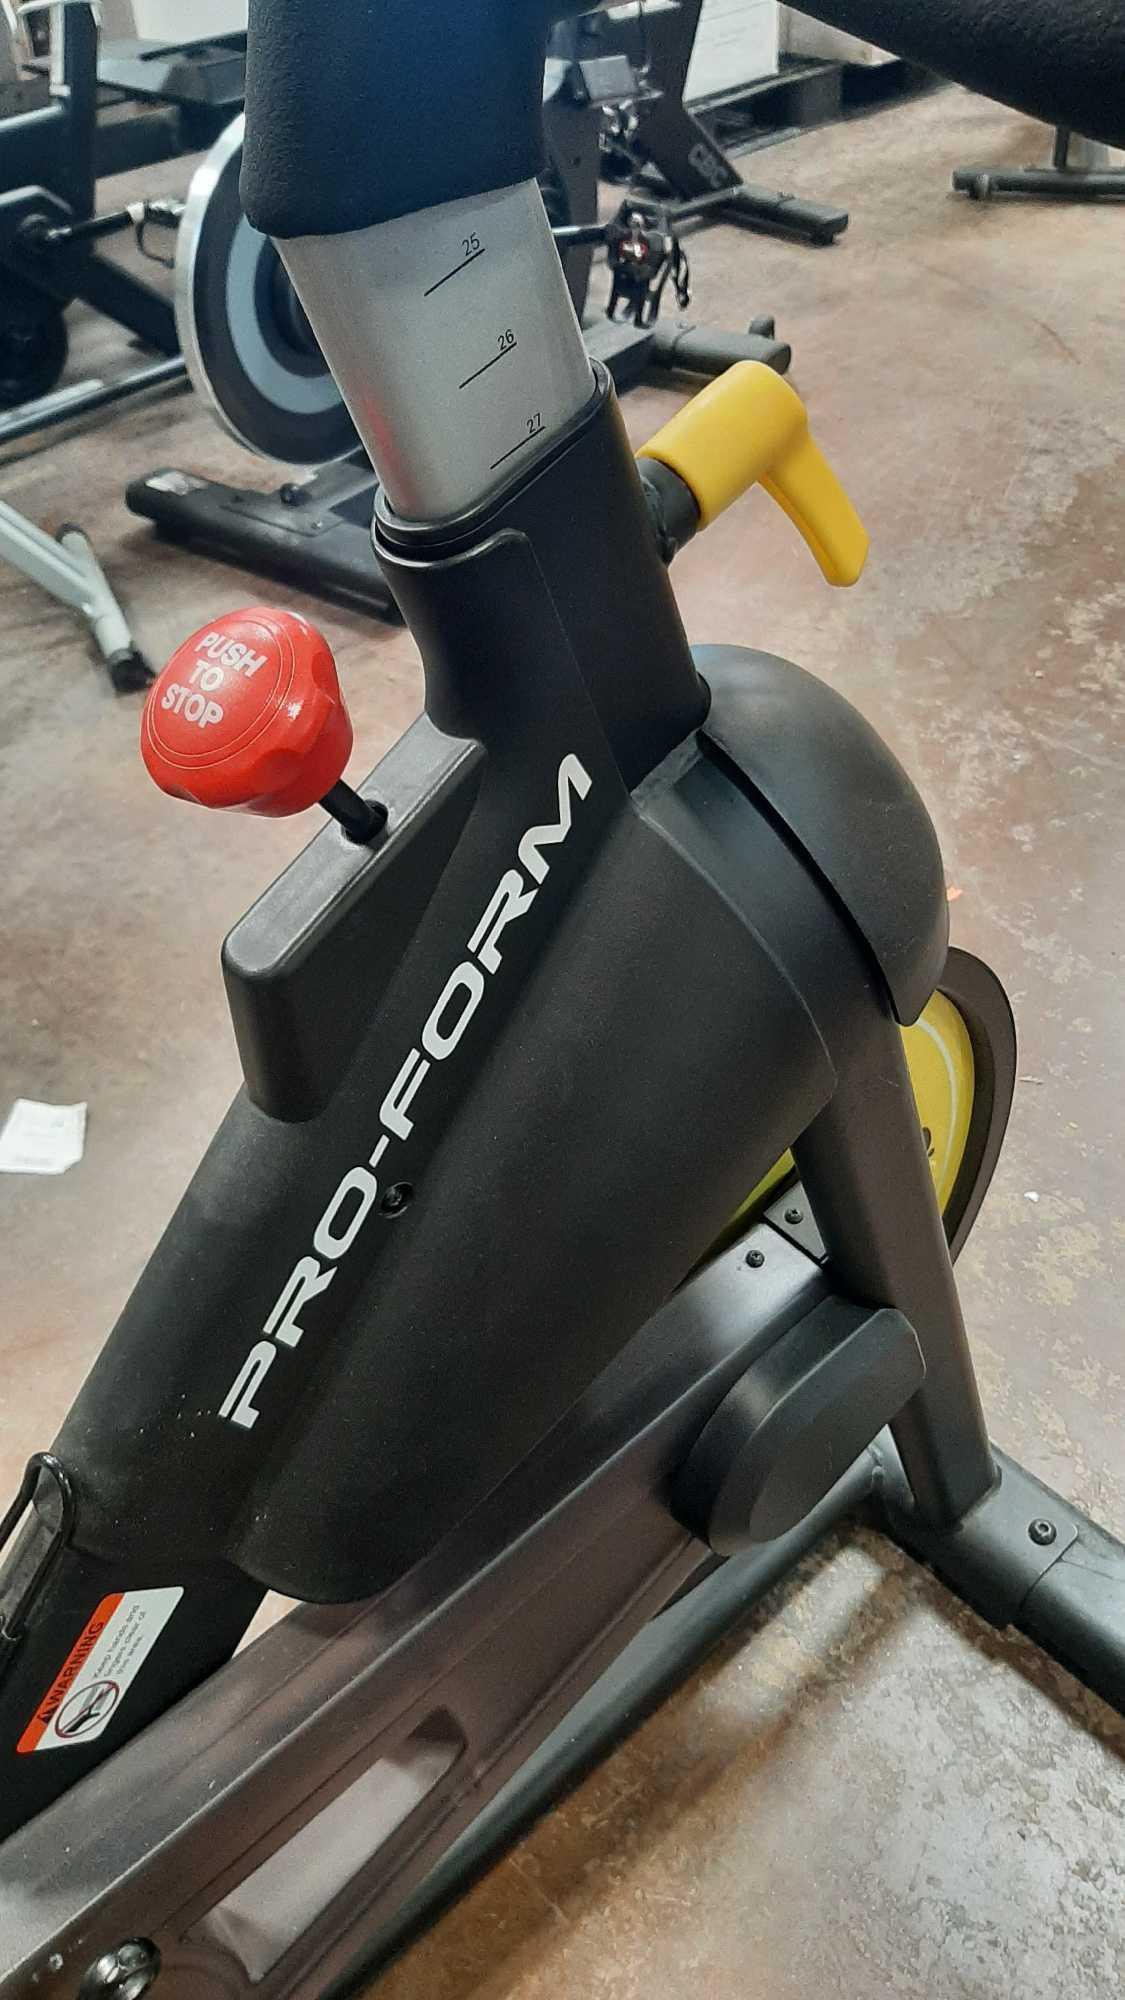 Proform Tour De France CBC Exercise Spin Bike with Tablet Holder*TURNS ON*MISSING*